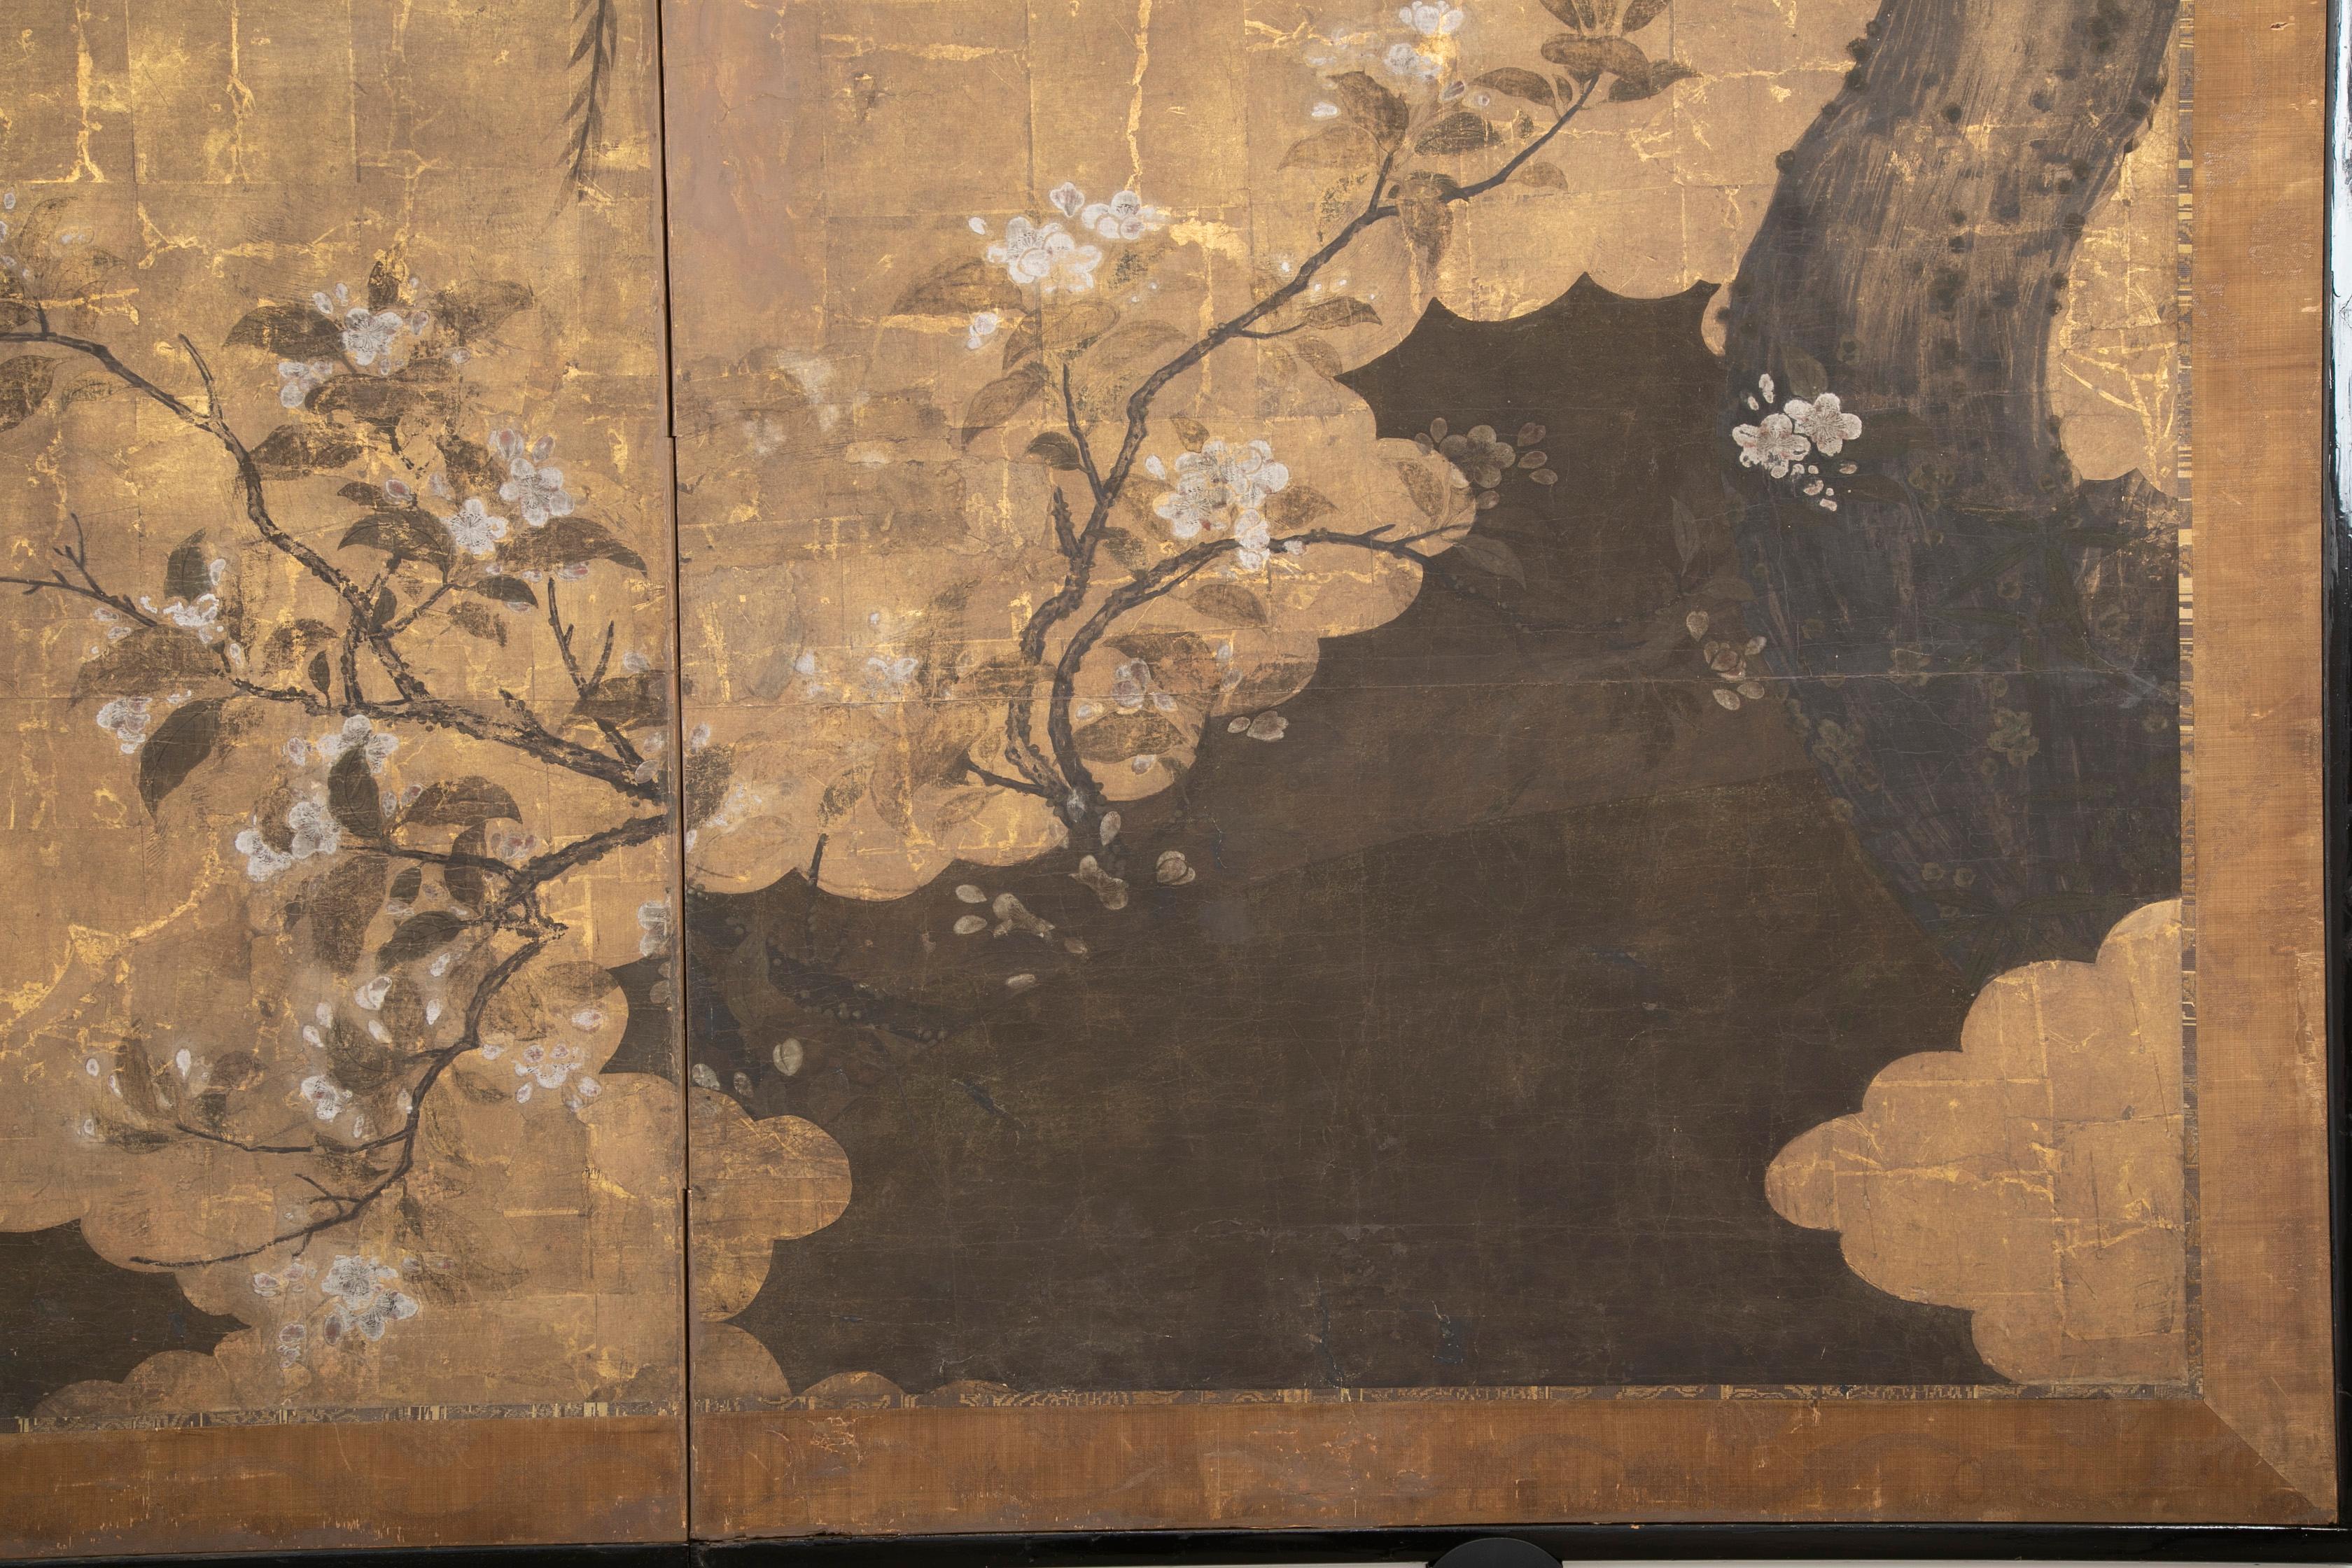 Two panel ink and gold leaf Japanese screen depicting water, weeping willows and a blossoming bush. 19th century Edo period in the style of the earlier 17th century Edo period.